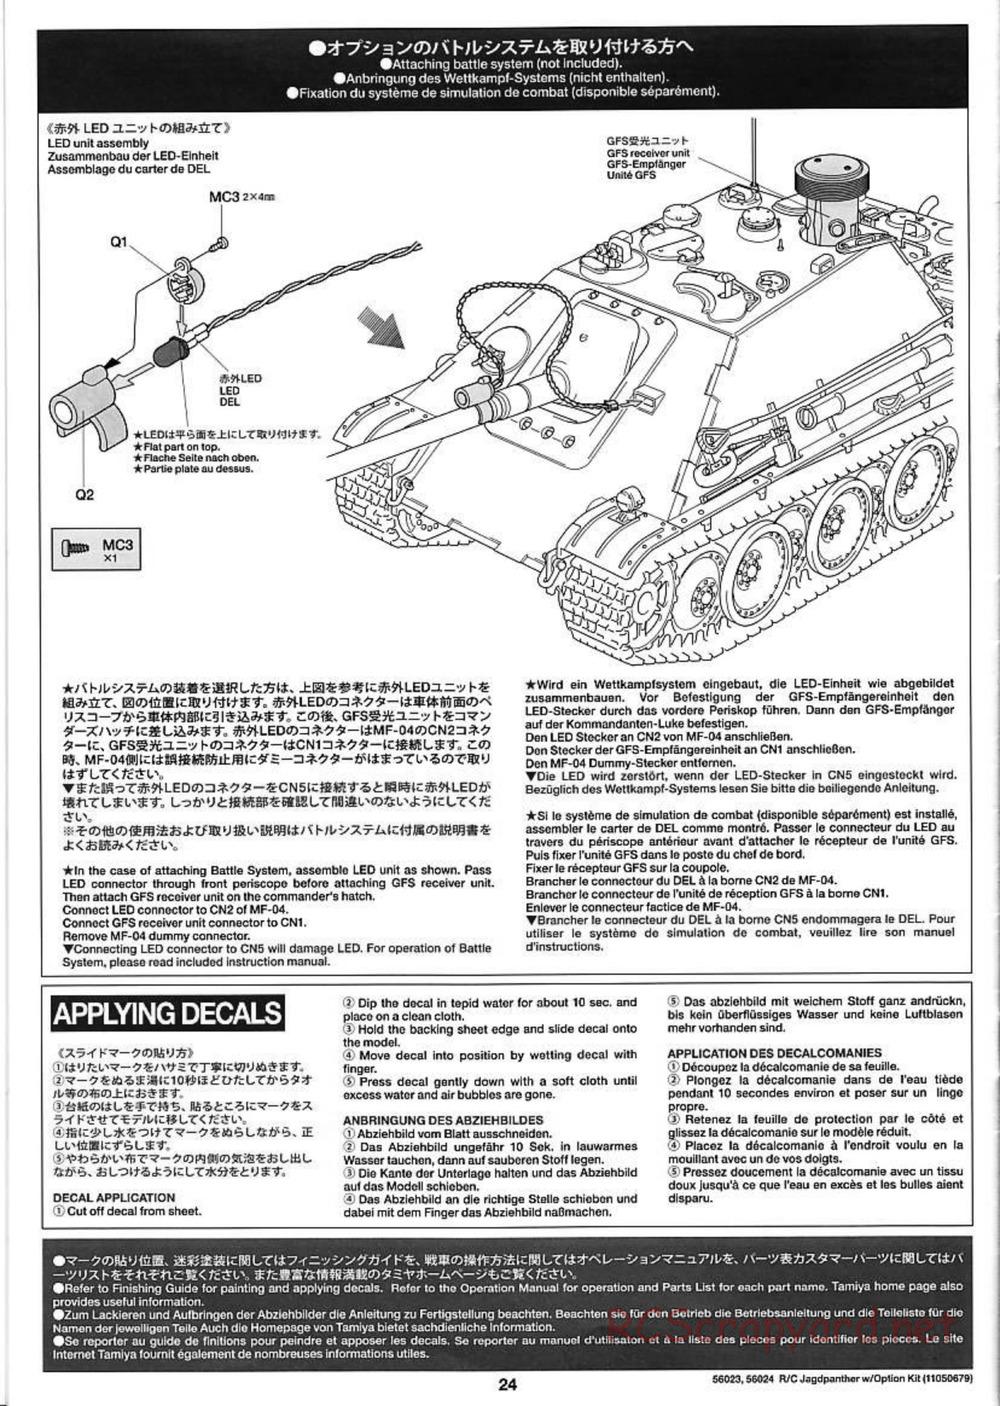 Tamiya - Jagdpanther - 1/16 Scale Chassis - Manual - Page 24